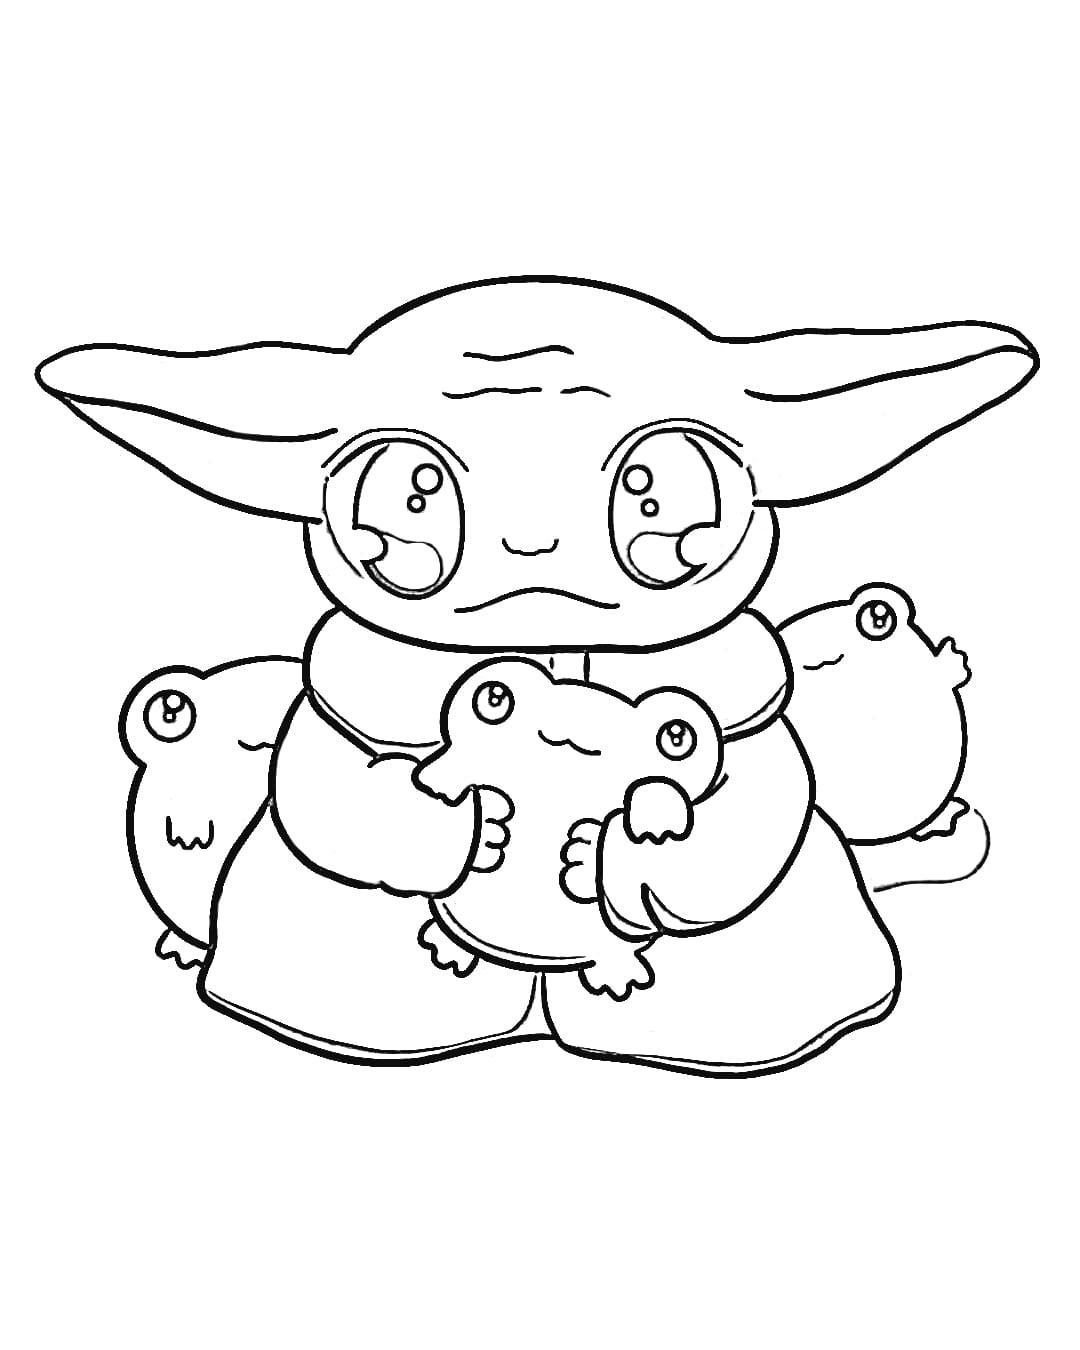 Baby Yoda and toys Coloring Pages   Baby Yoda Coloring Pages ...